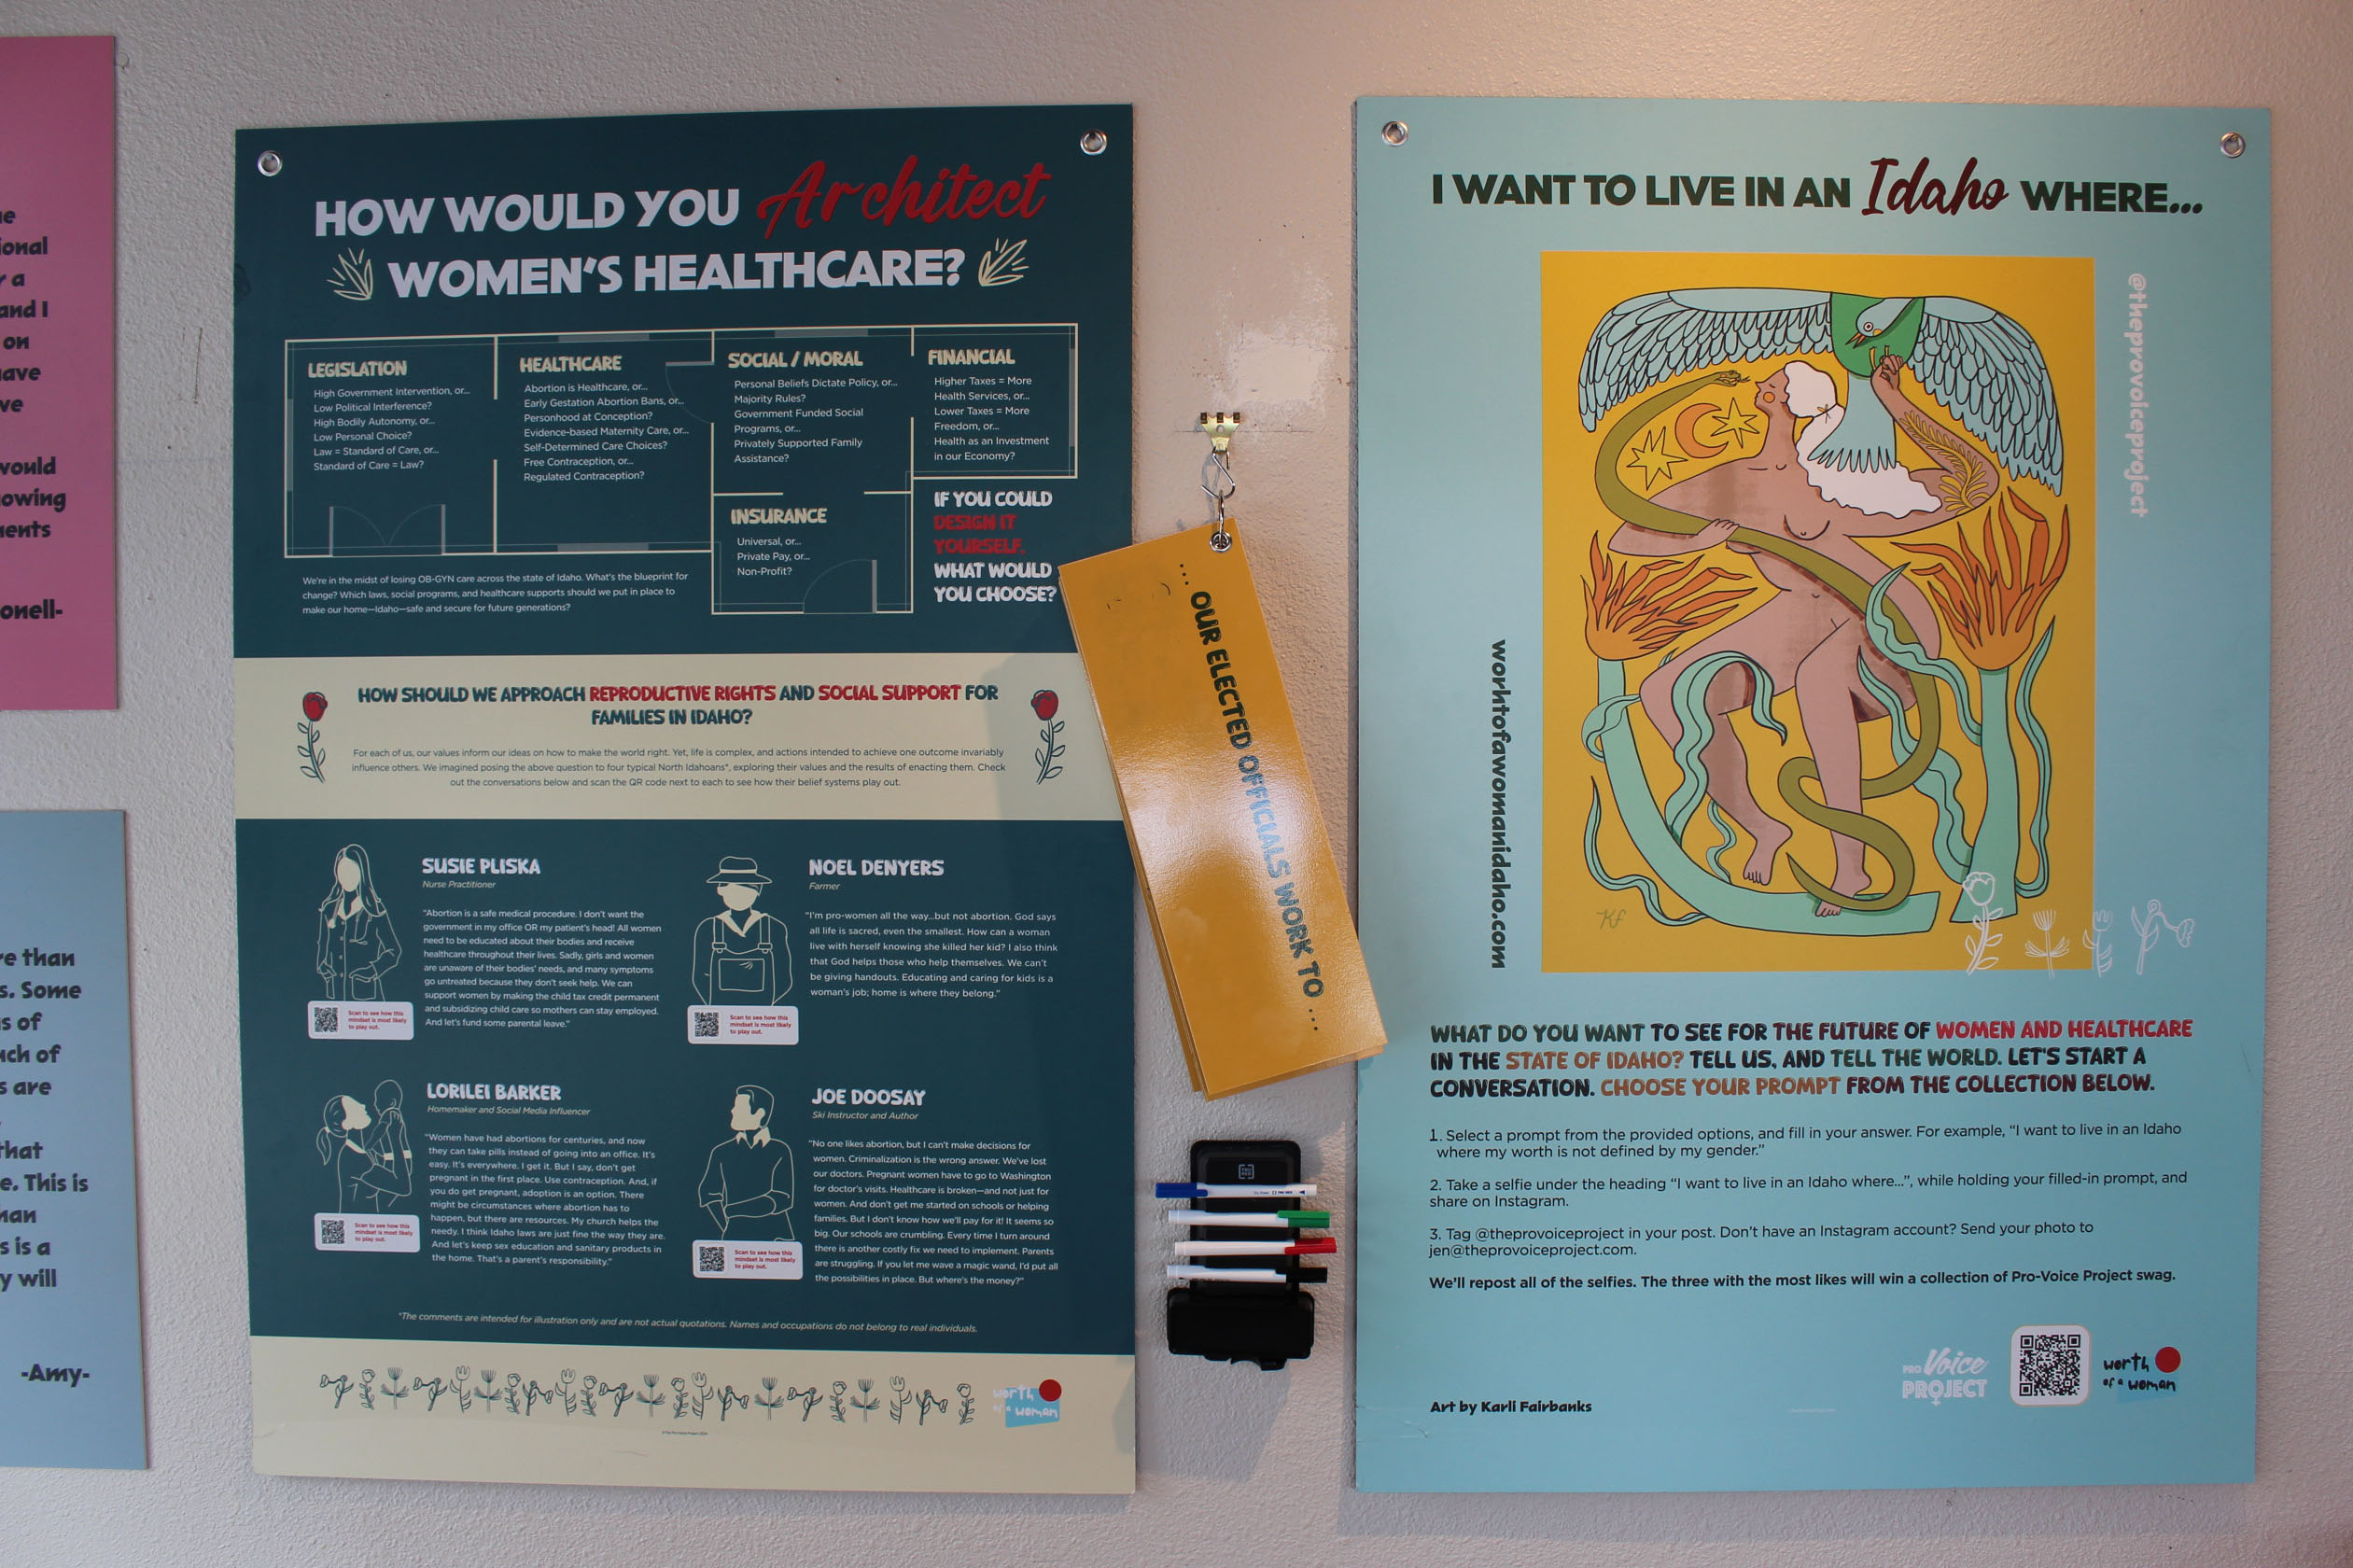 Picture of two posters on the wall. The poster on the left says, "How would you design women’s health care?" and it is further divided into sections say "Legislation," "Health care," "Social/moral," "Insurance," And "financial." Below, it further says, "If you could design it yourself, what would you choose? / How should we approach reproductive rights and social support for families in Idaho?" After this there is a section containing information about some eminent personalities. The poster on the left says, "I want to live in an Idaho where... / What would you like to see for the future of women and healthcare in the state of Idaho? Tell us, and tell the world. Let's start a conversation. Choose your prompt from the collection below."